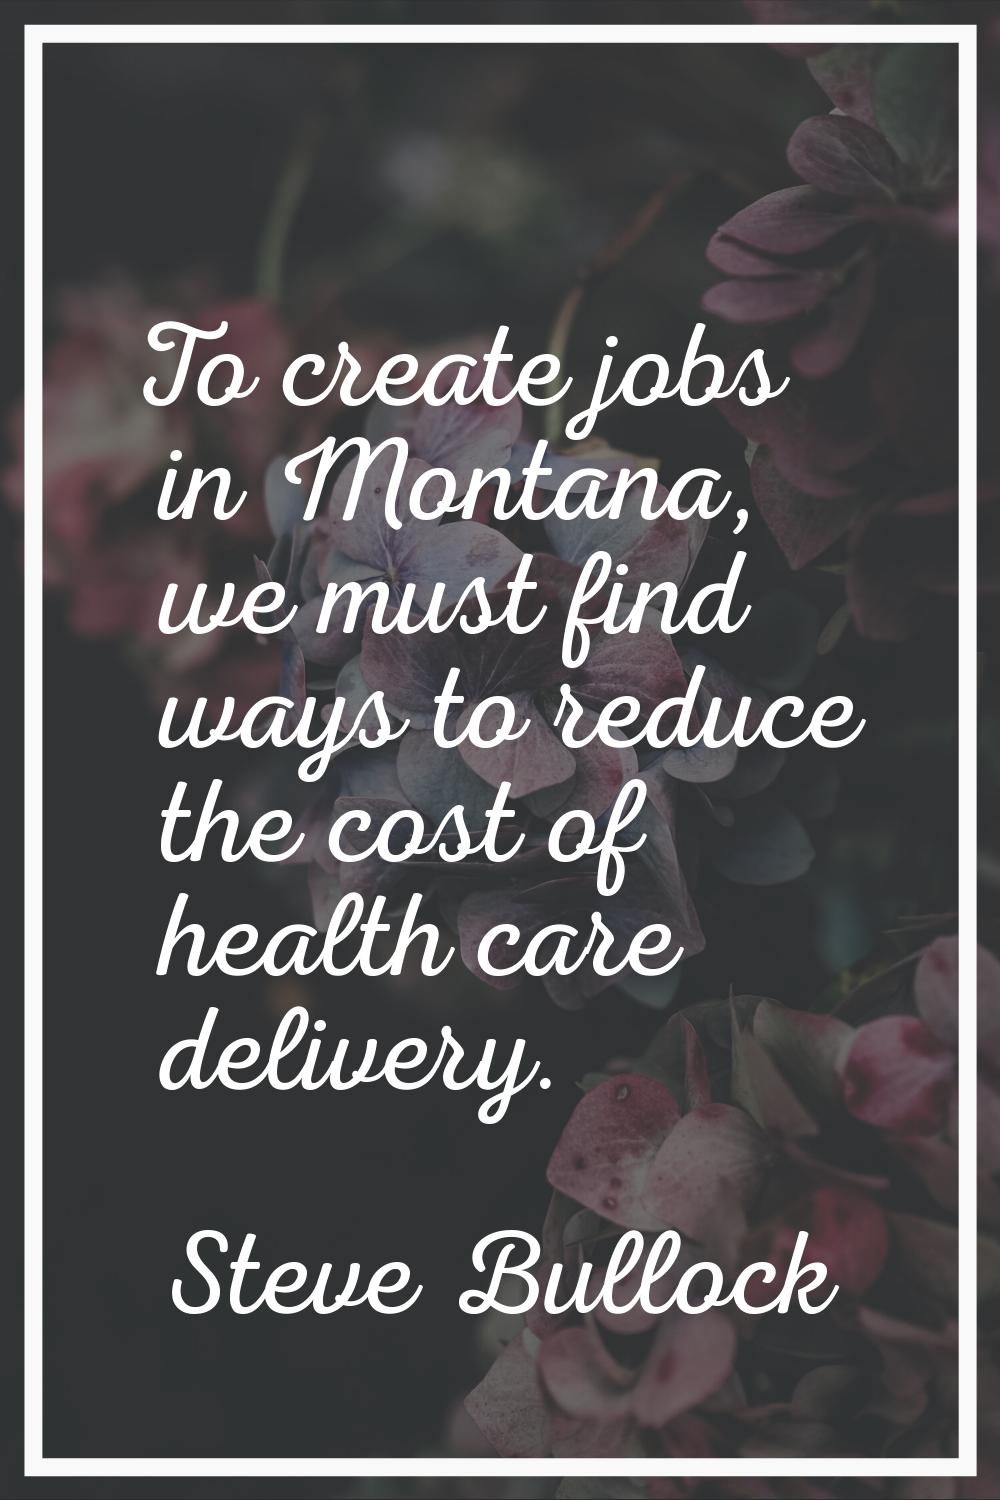 To create jobs in Montana, we must find ways to reduce the cost of health care delivery.